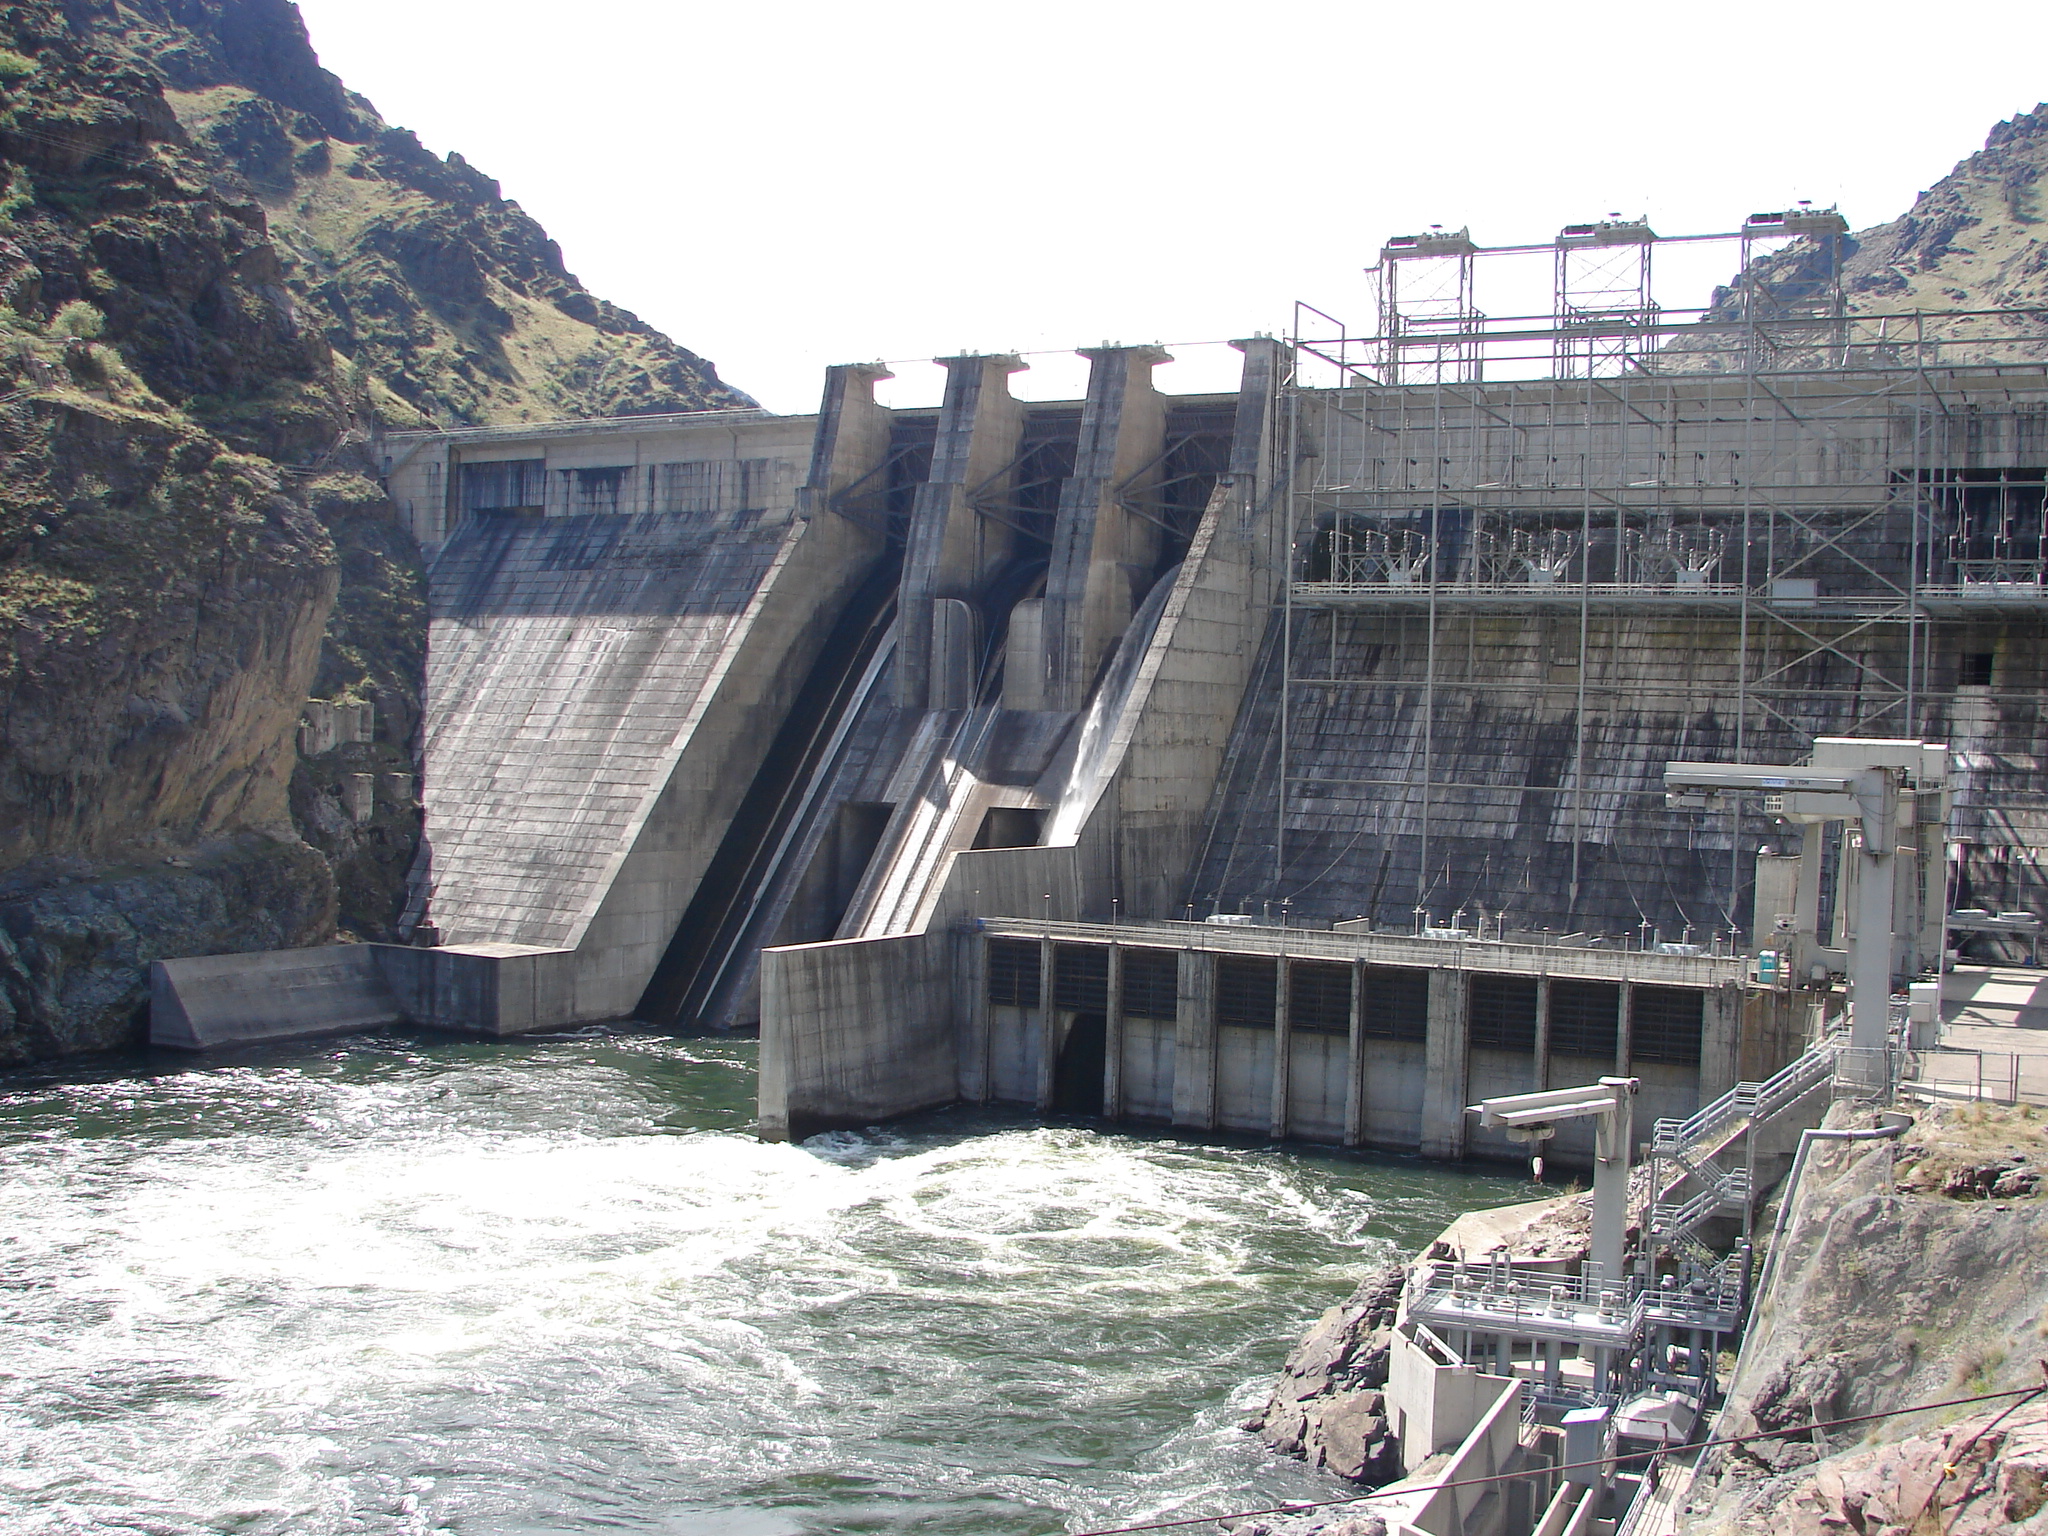 Water being released from the Hells Canyon Dam into the Snake River